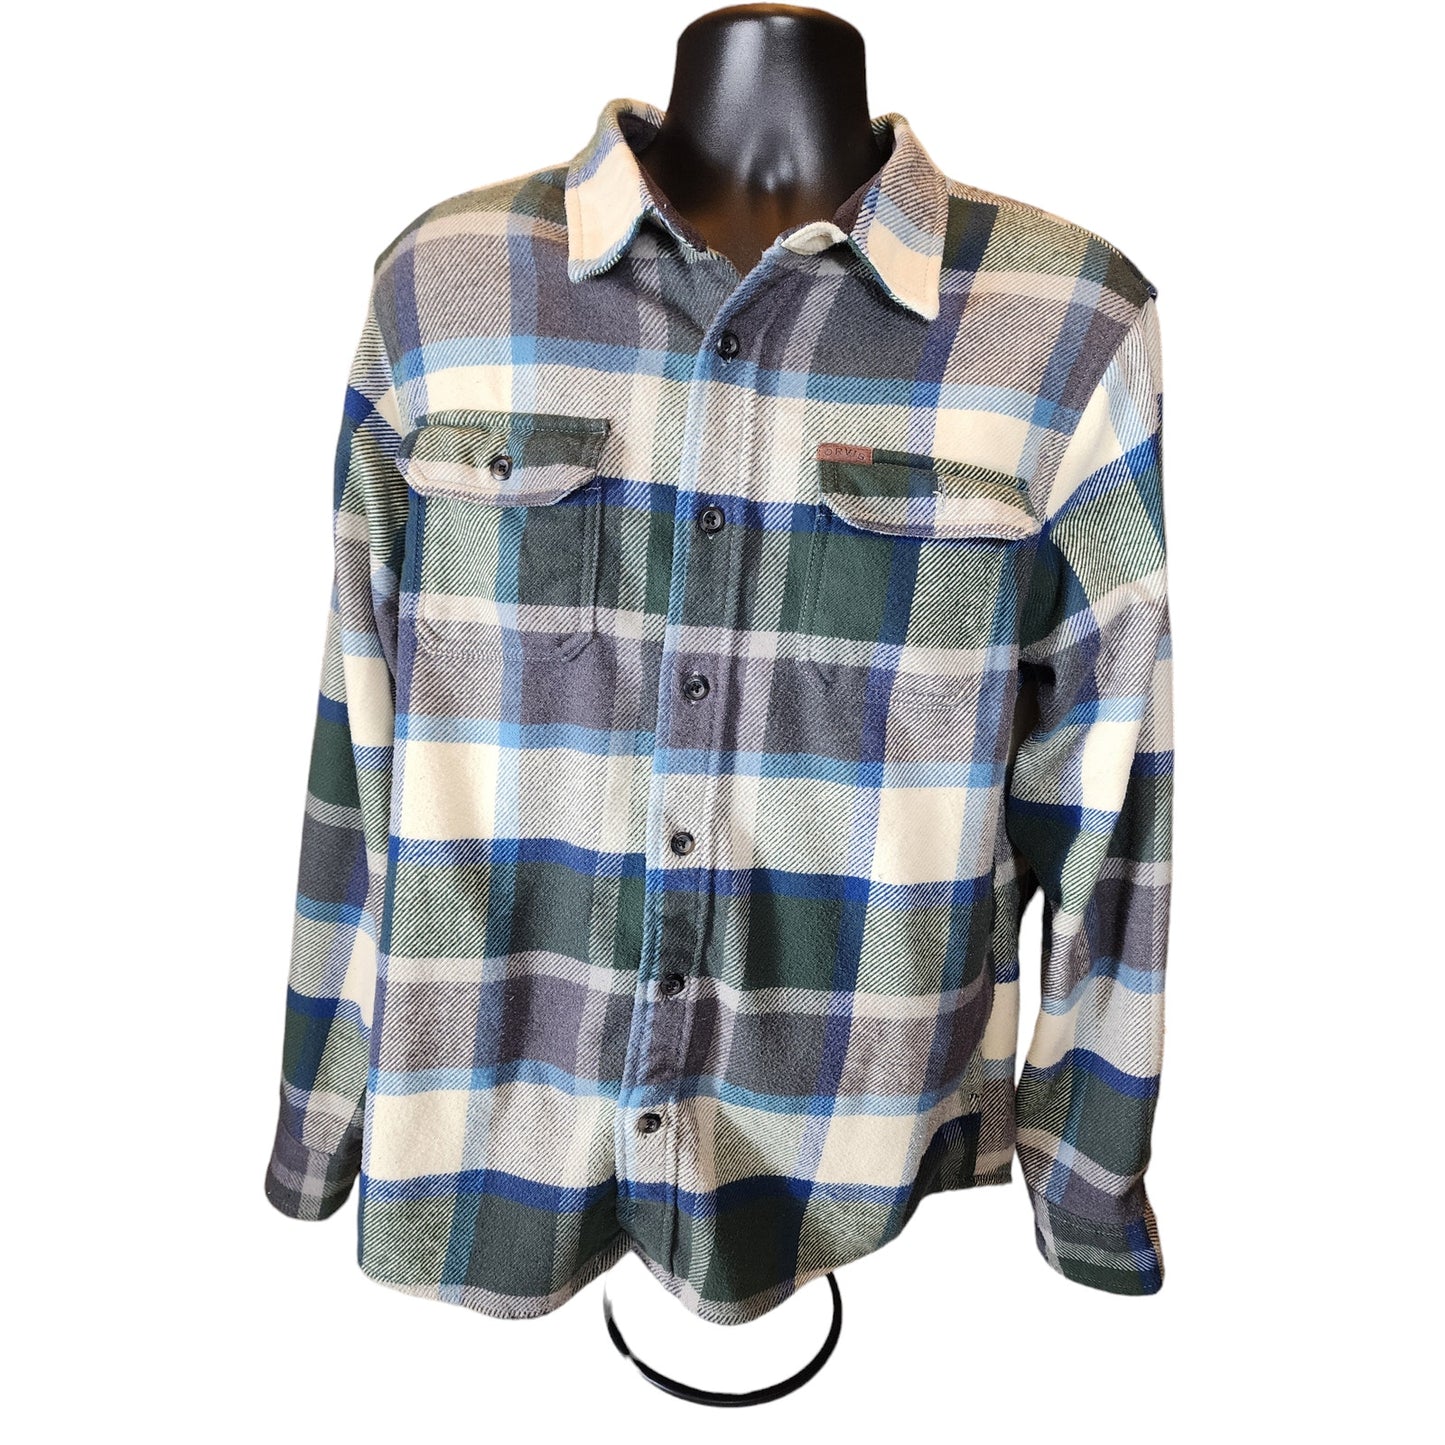 Orvis Plaid Flannel Shirt Mens Large Long Sleeve Classic Button Down Rugged